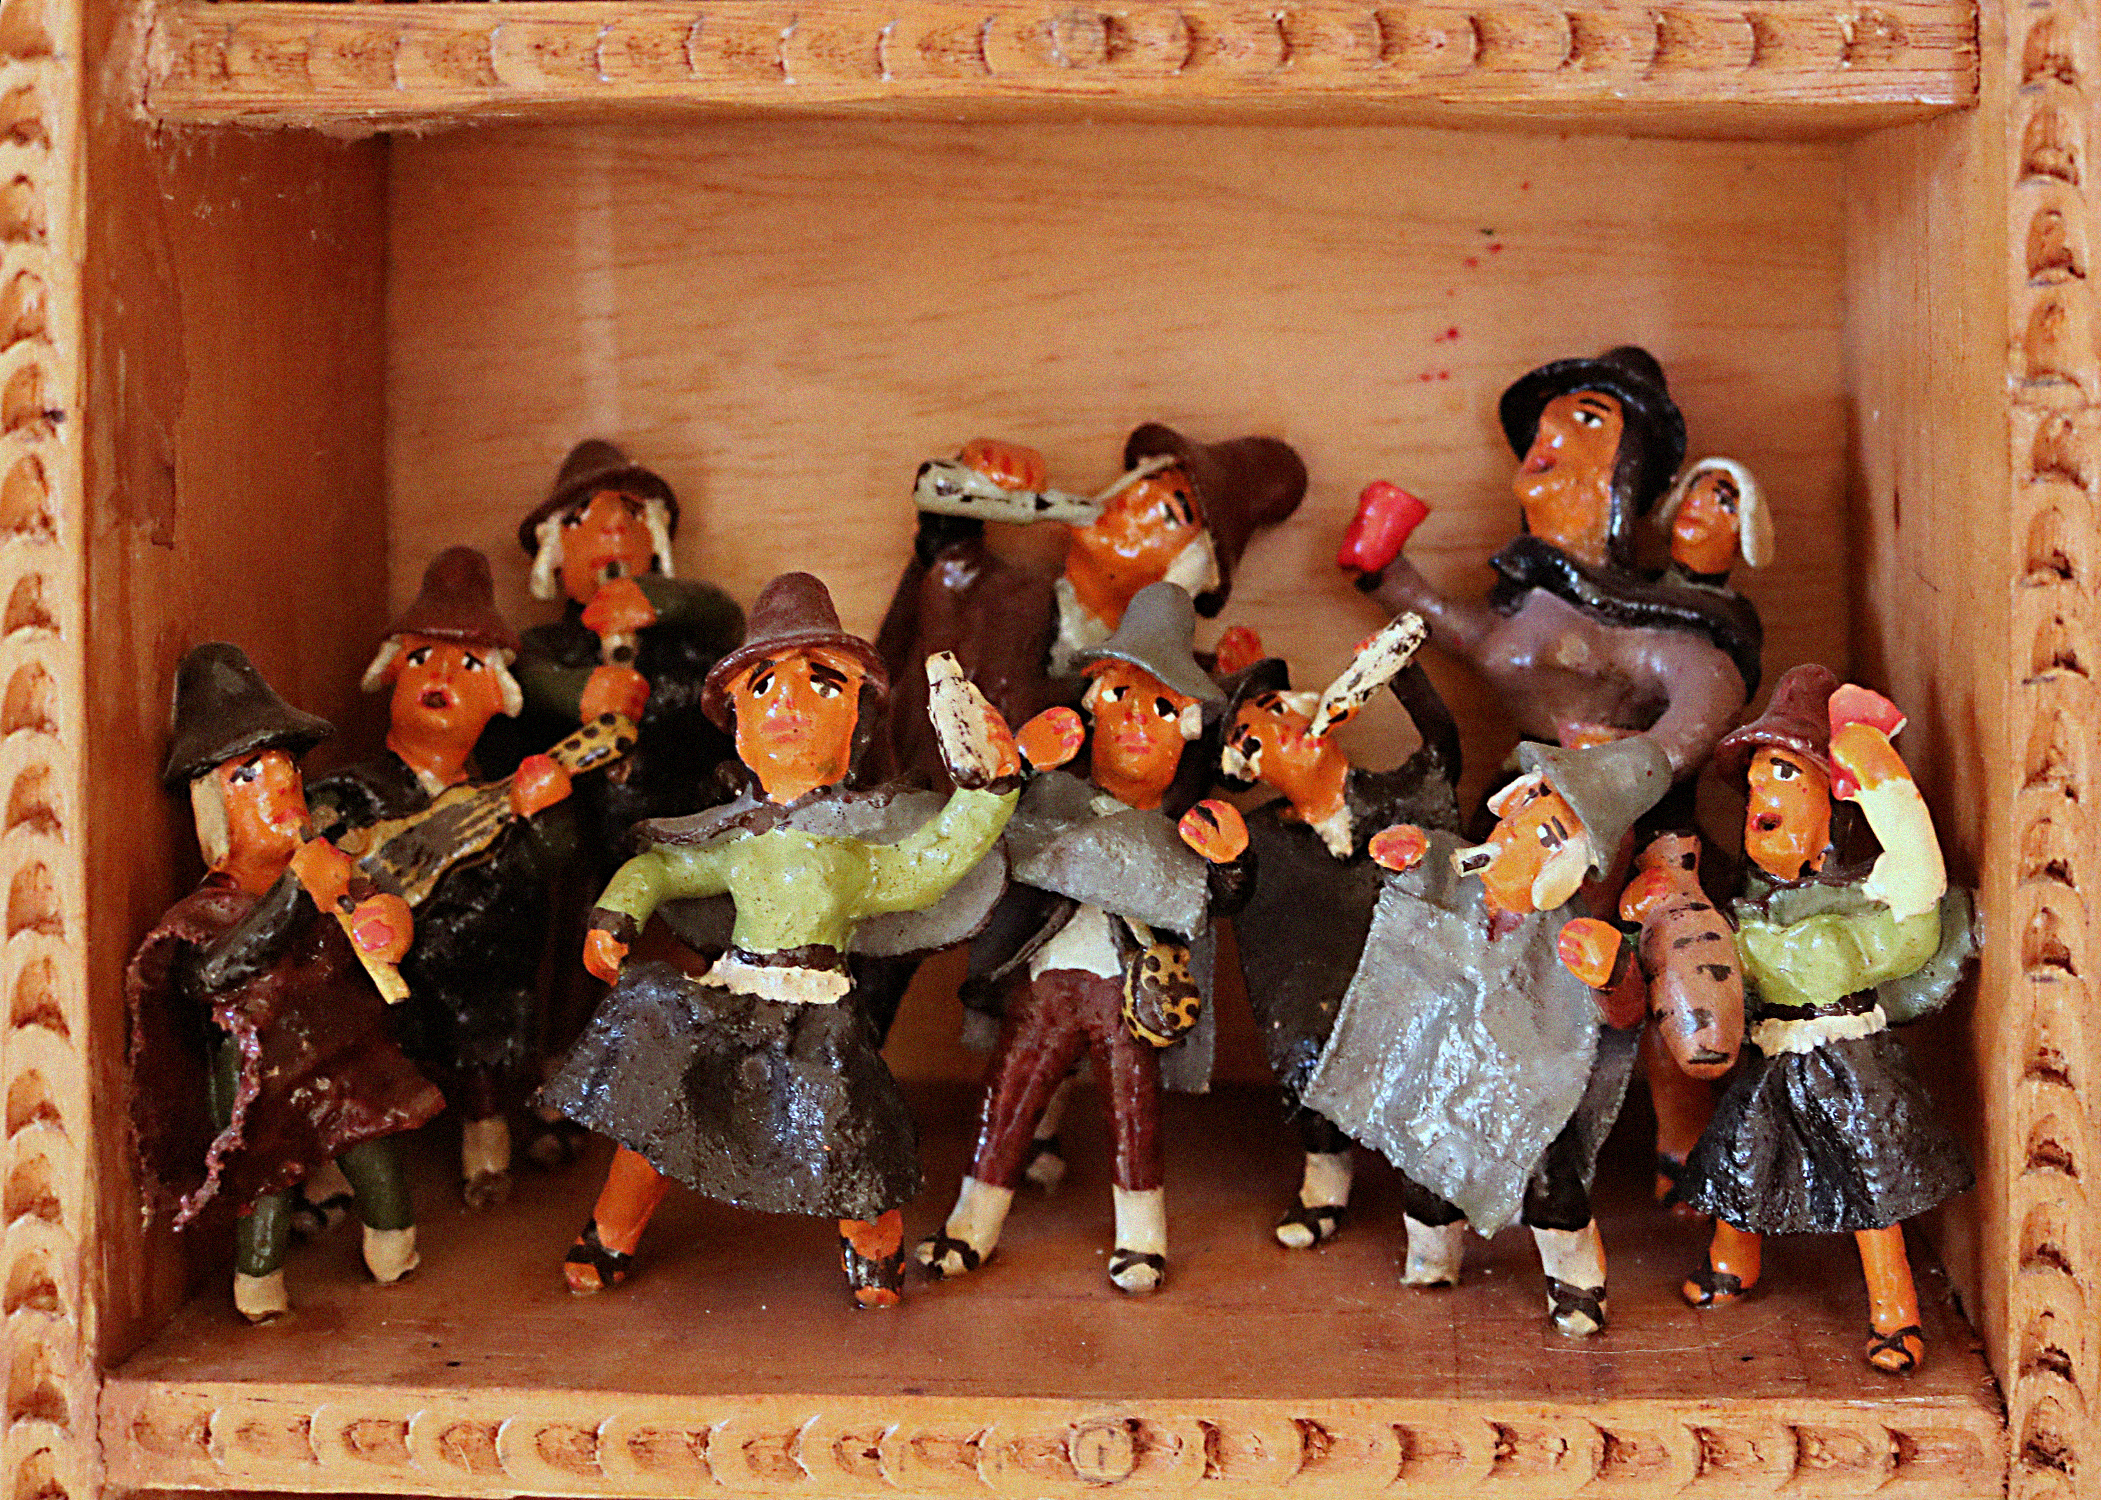 A scene called Traditional Customs within a retablo. The scene portrays humanlike figurines in a group. The men and women portrayed wear earthy colors like green, grey, brown, and dark red. All the figurines wear hats. Most hold and drink from white bottles. One figurine holds a guitar and two other hold flutes to their mouths.